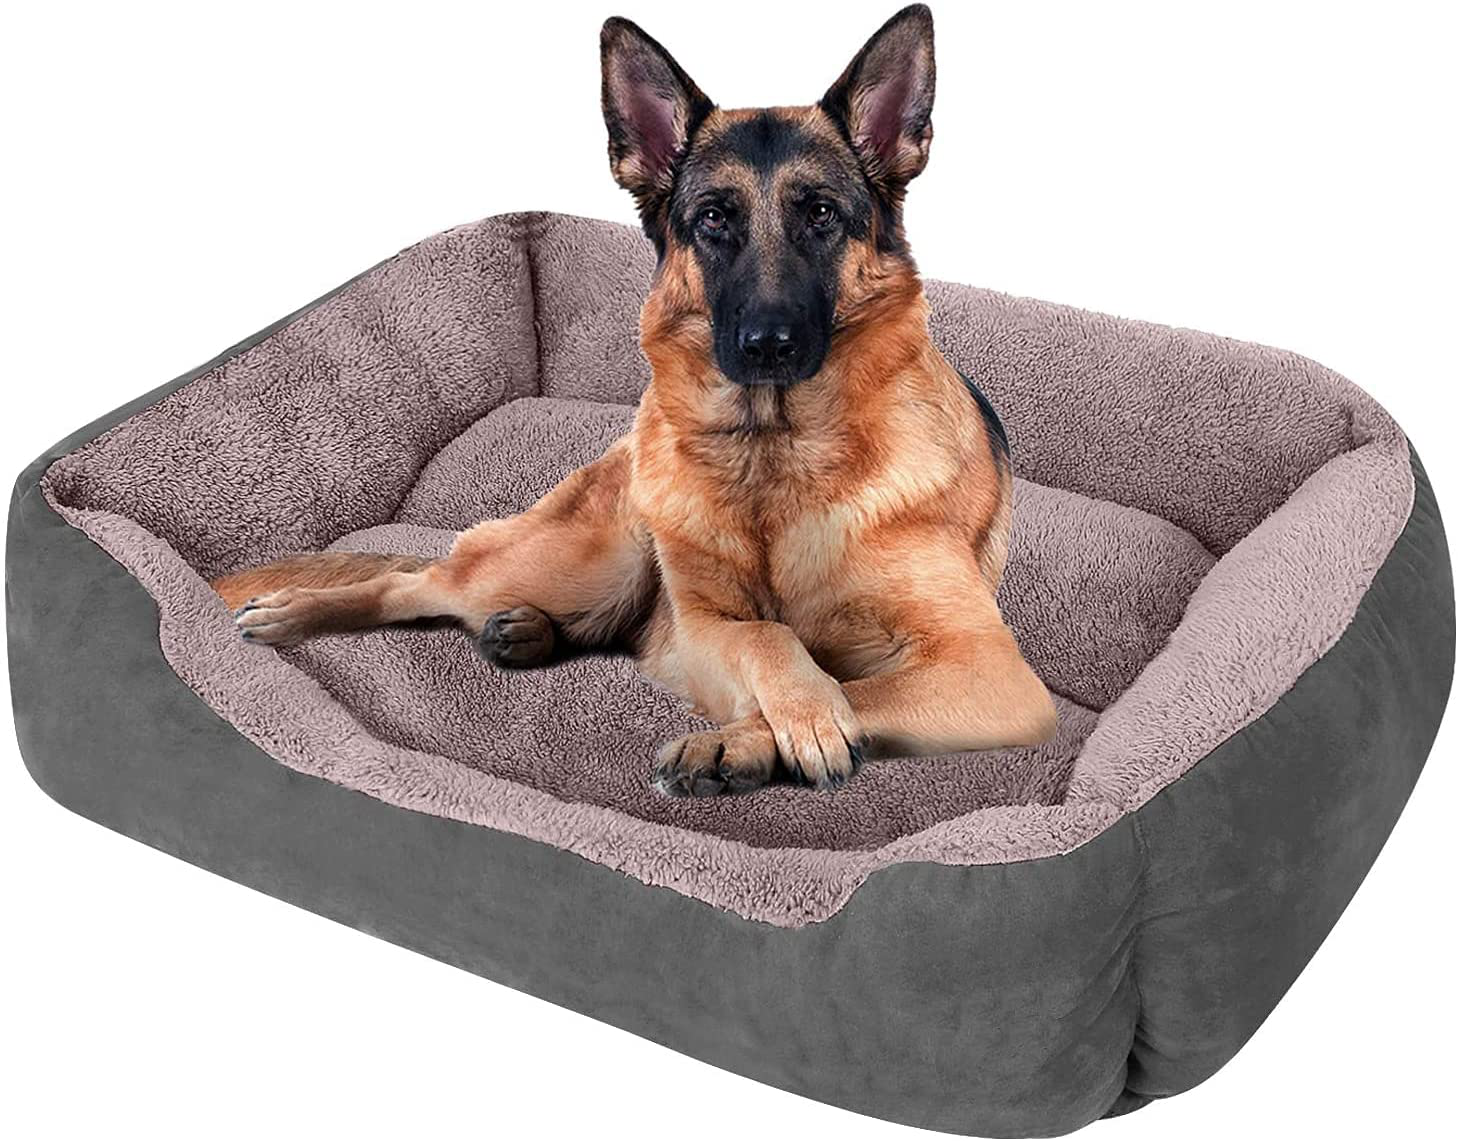 CLOUDZONE Dog Beds for Large Dogs, Large Dog Bed Machine Washable Rectangle Breathable Soft Padding with Nonskid Bottom Pet Bed for Medium and Large Dogs or Multiple